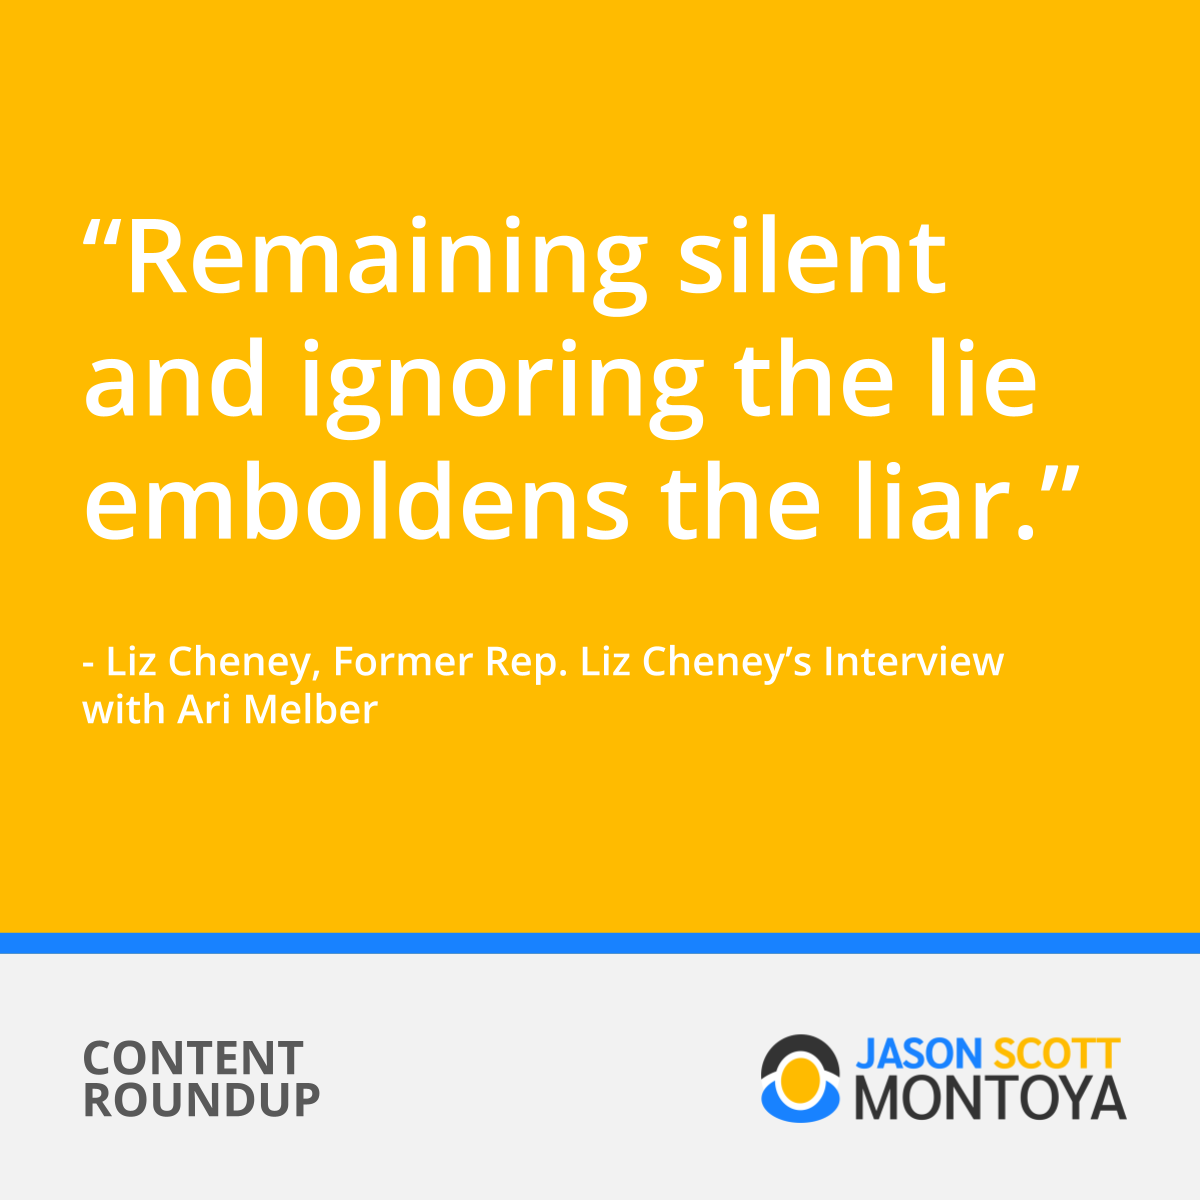 “Remaining silent and ignoring the lie emboldens the liar.” - Liz Cheney